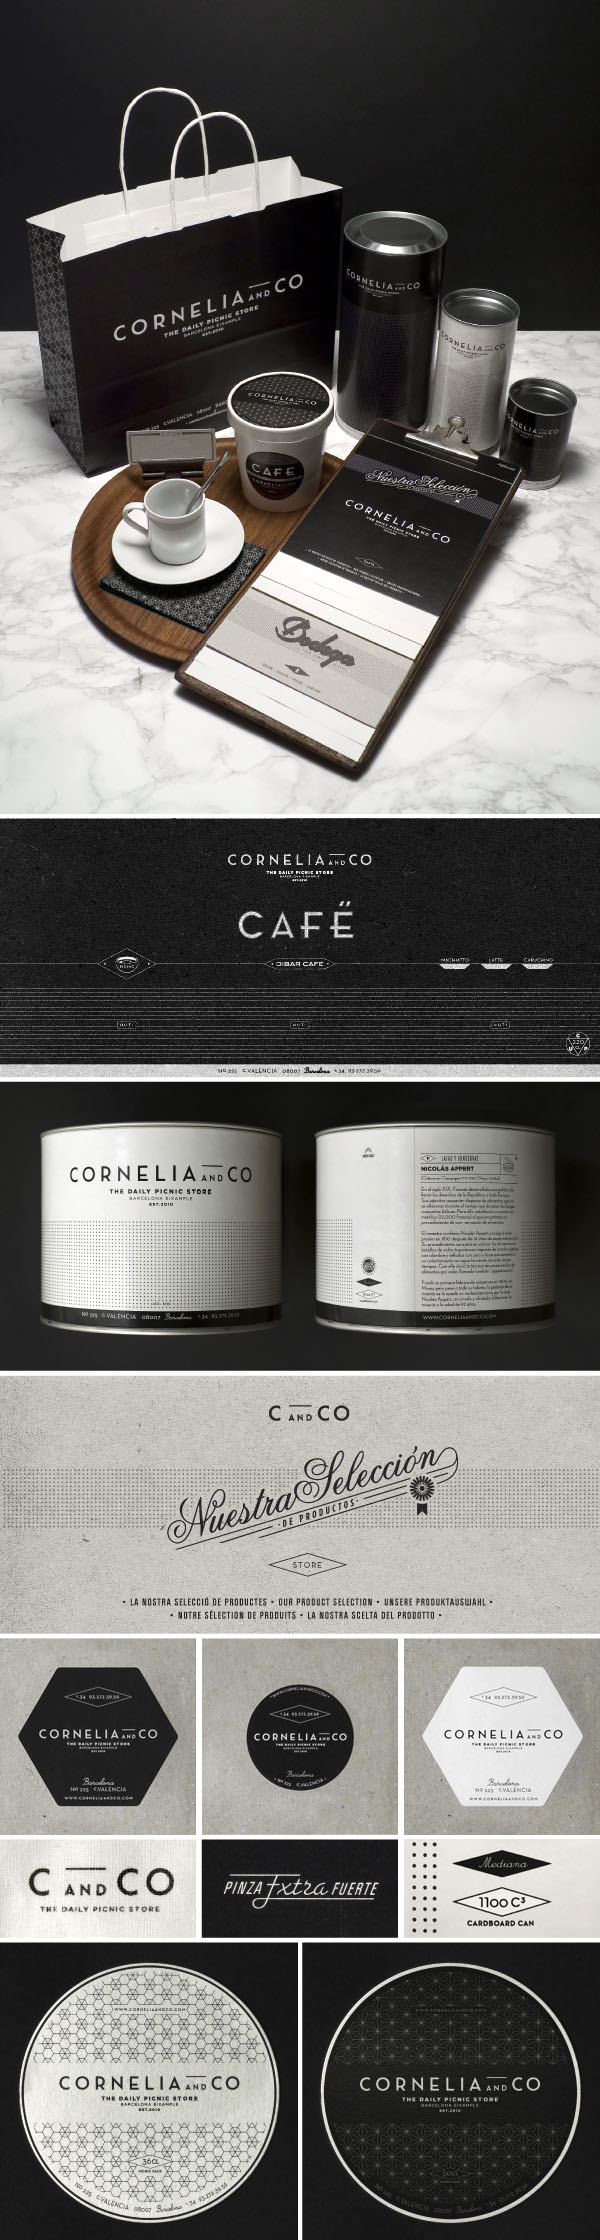 Cornelia and Co Brand and Package Design by Oriol Gil